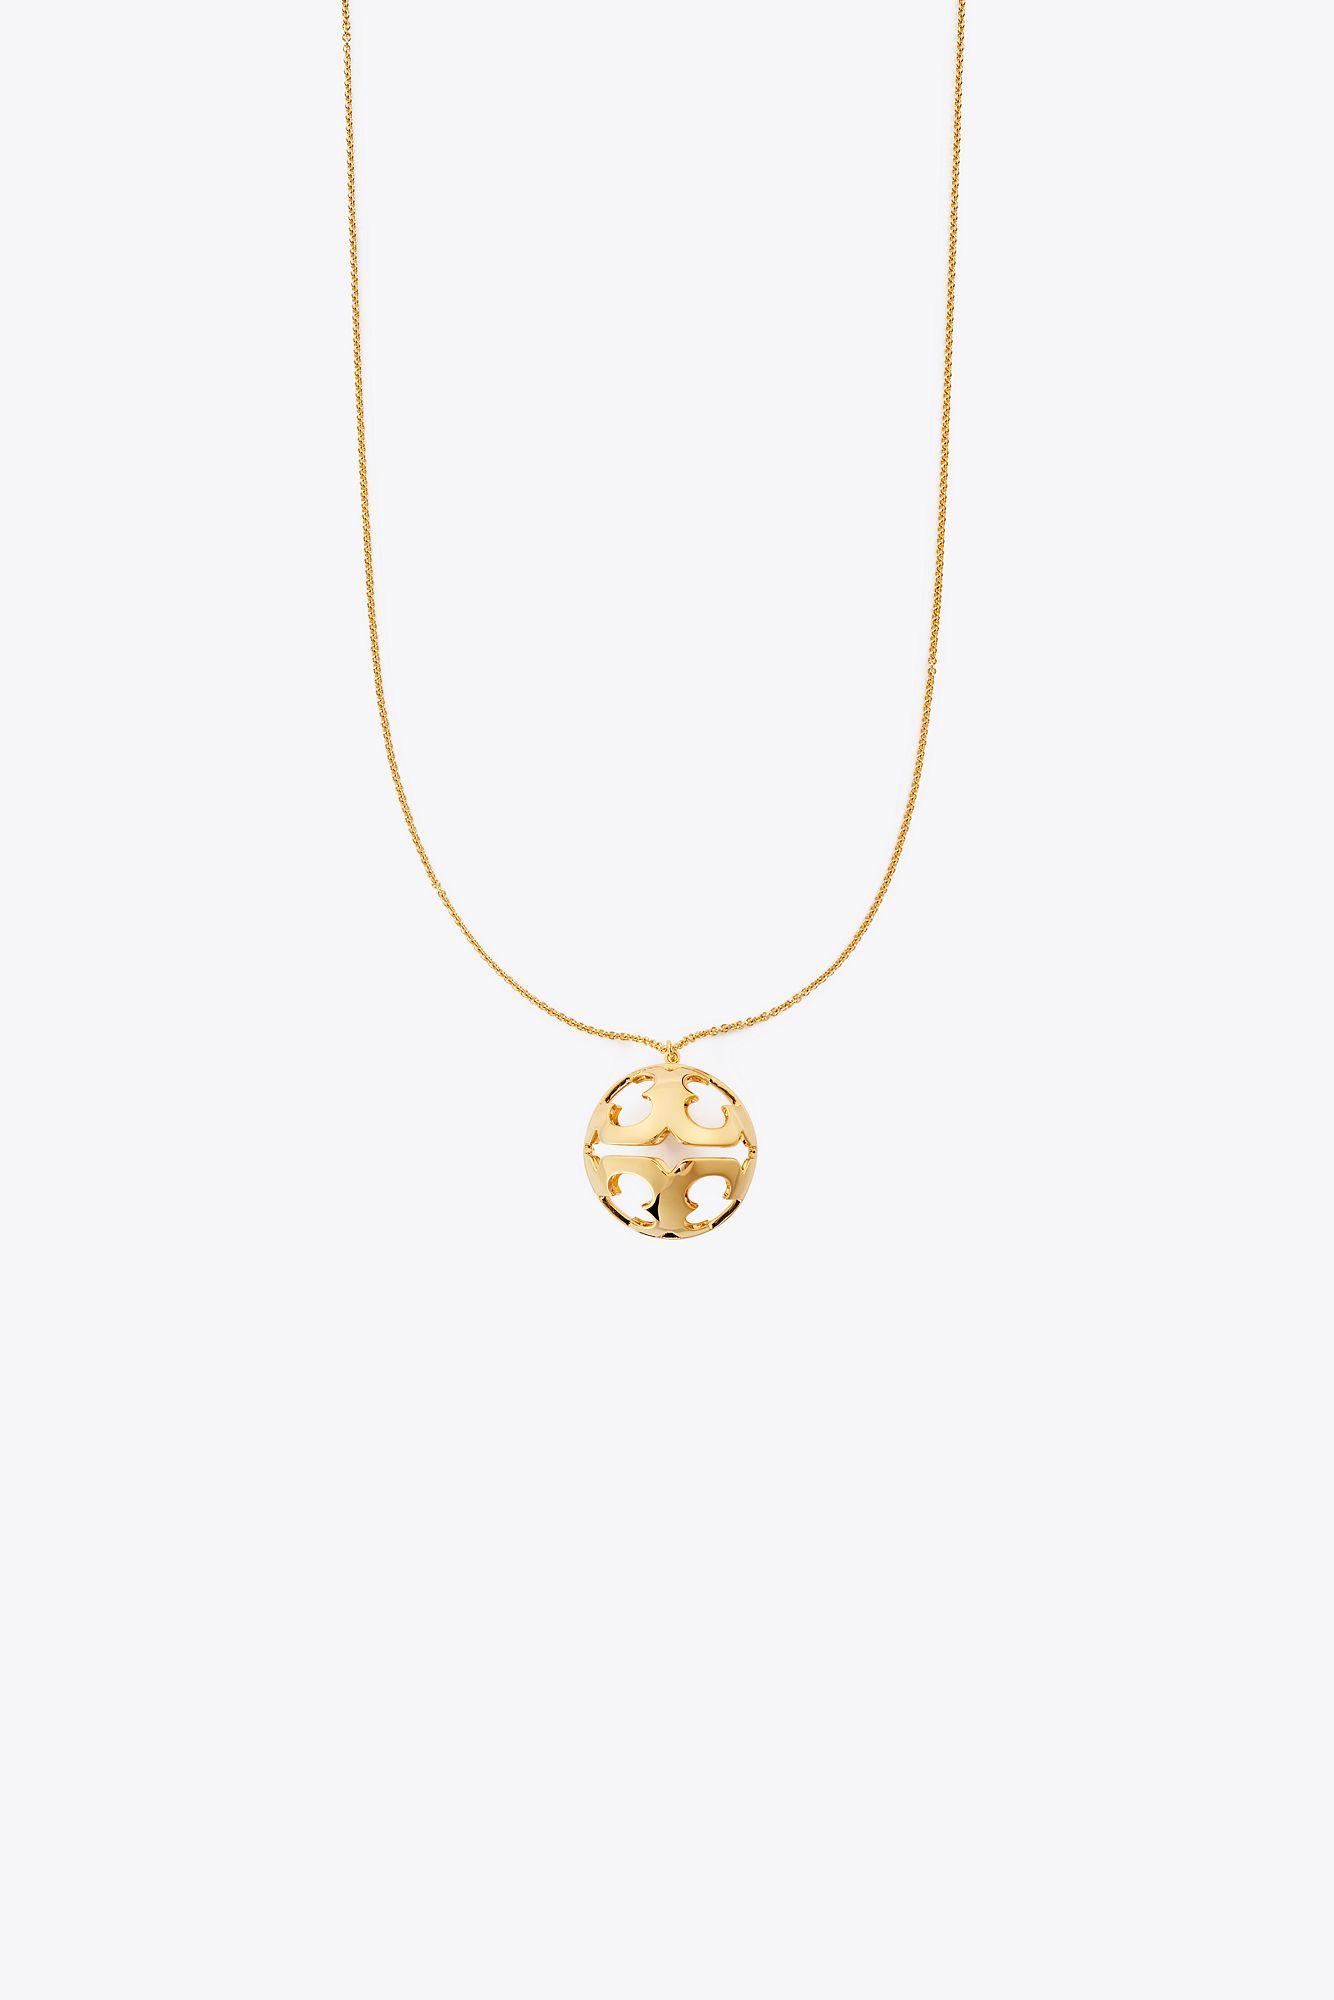 TORY BURCH Necklace MILLER in gold